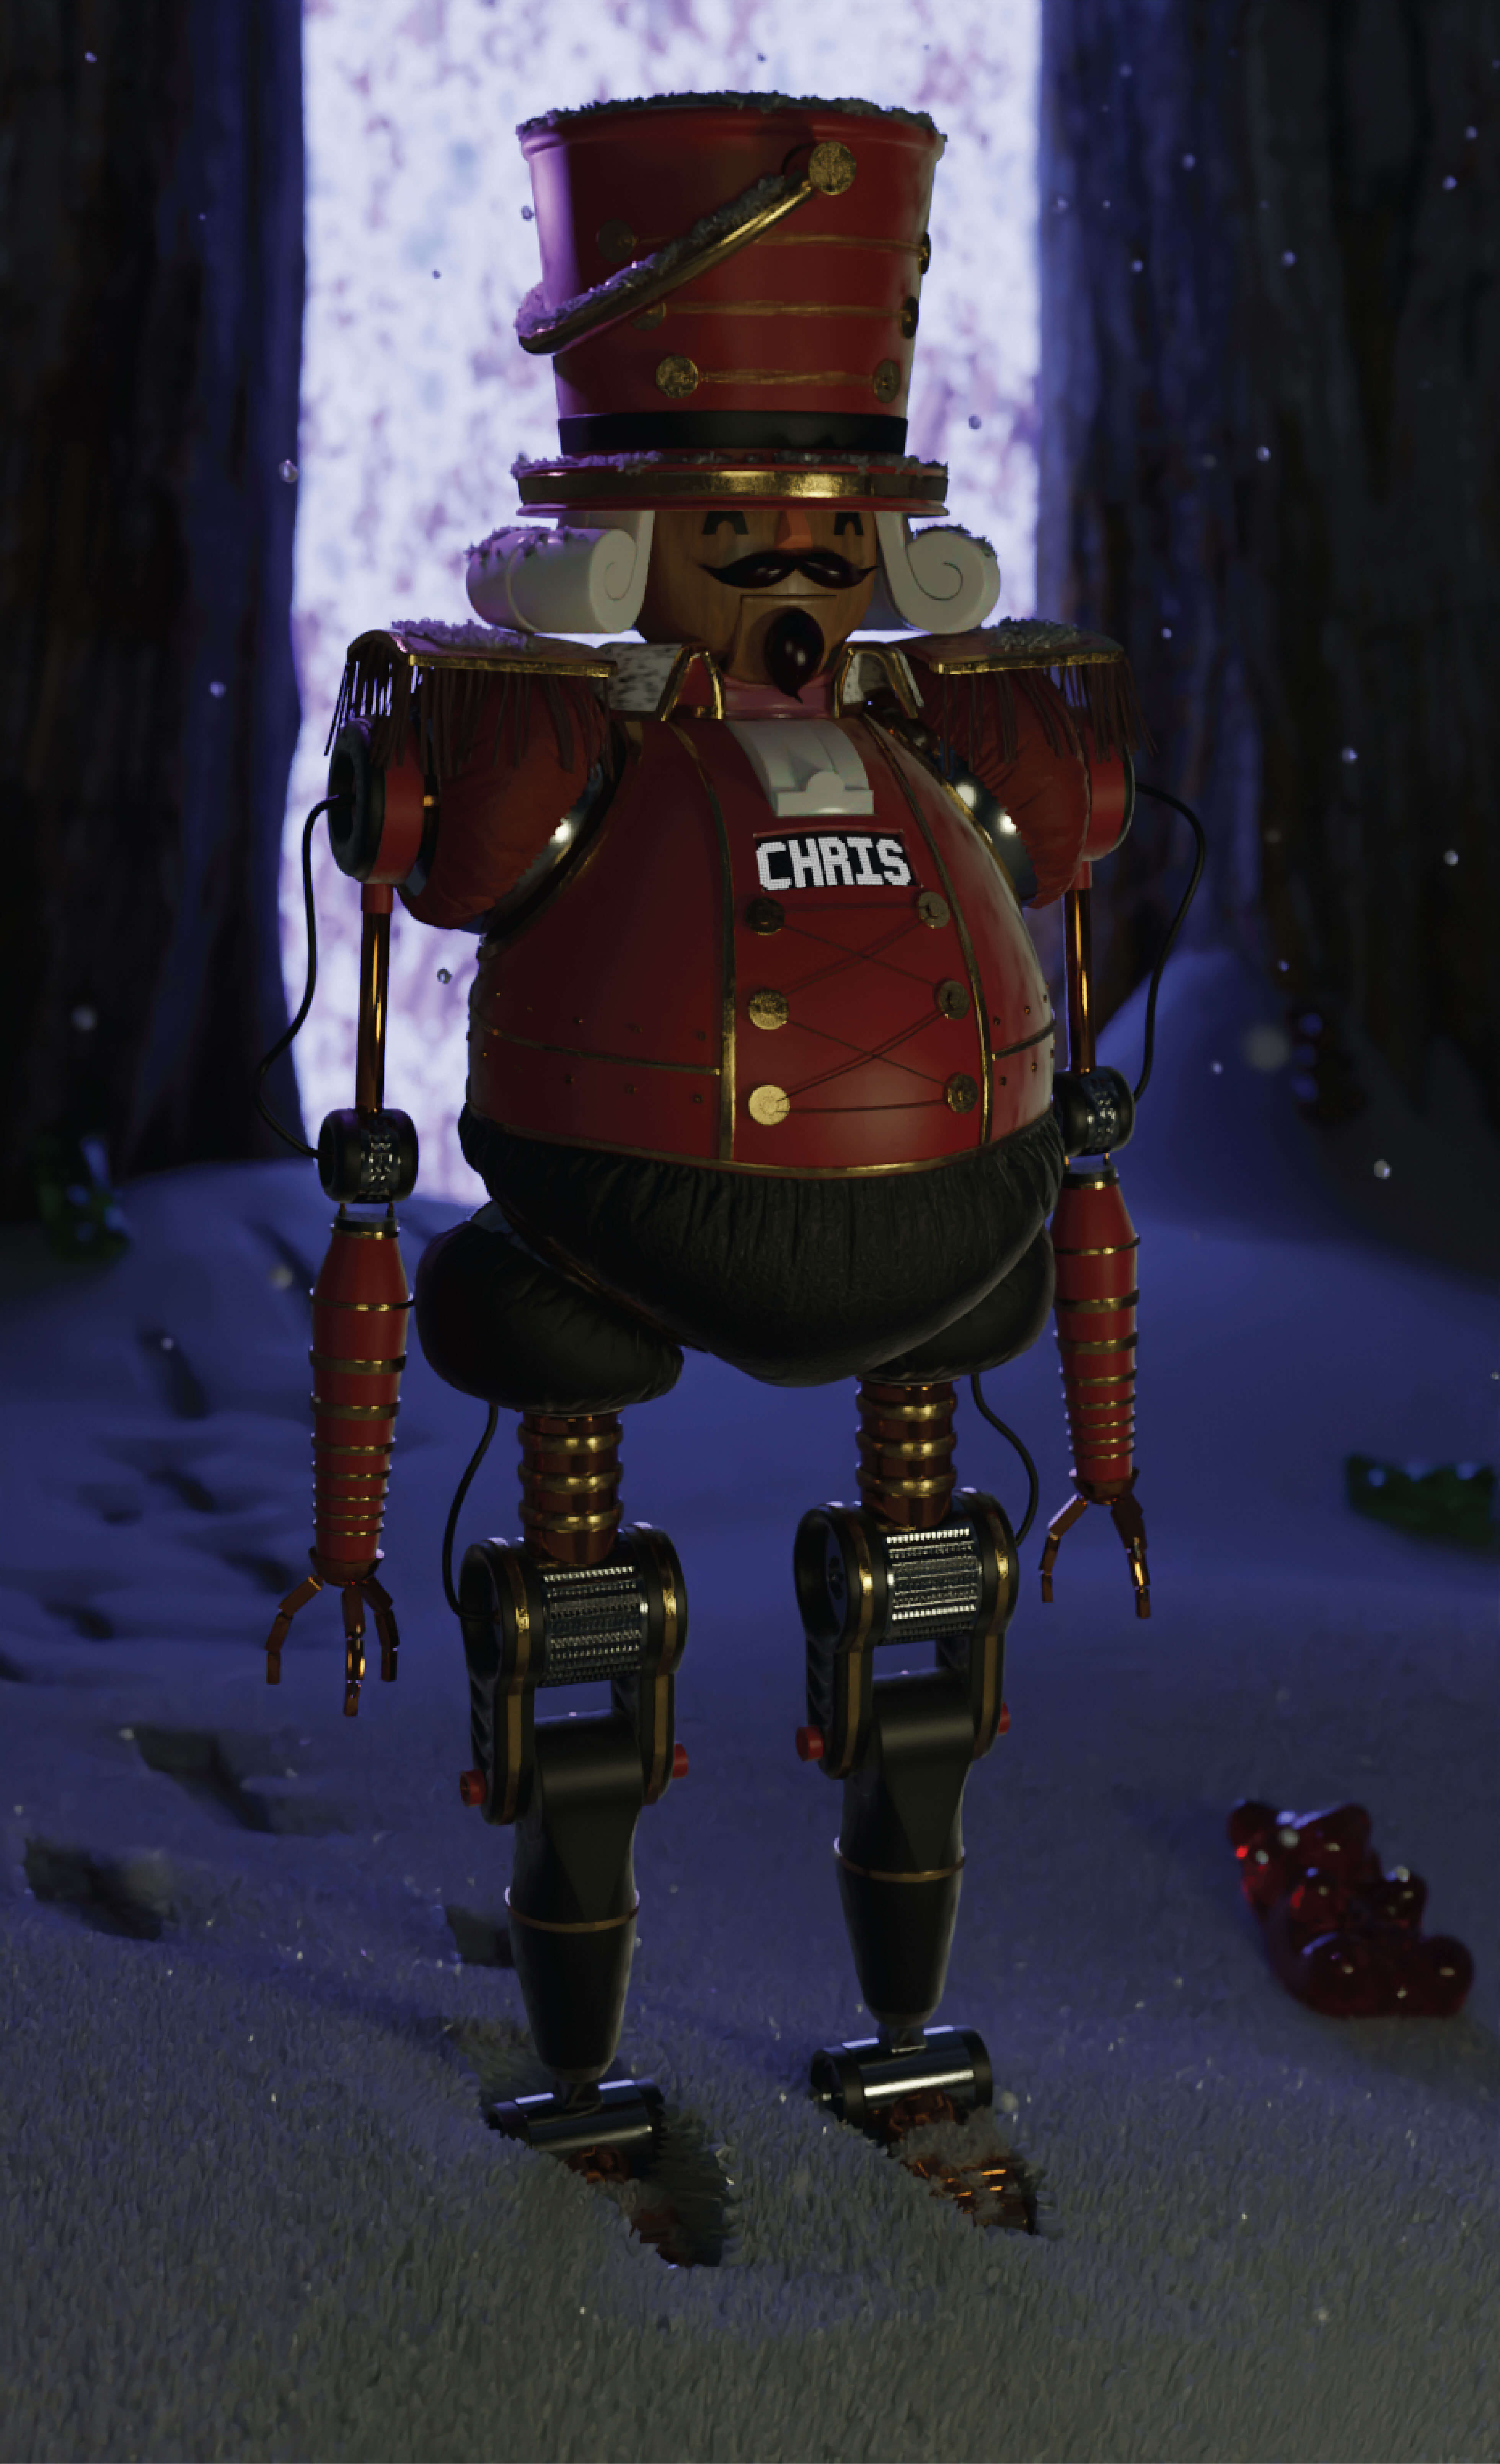 Render of nutcracker without post-processing and smoke